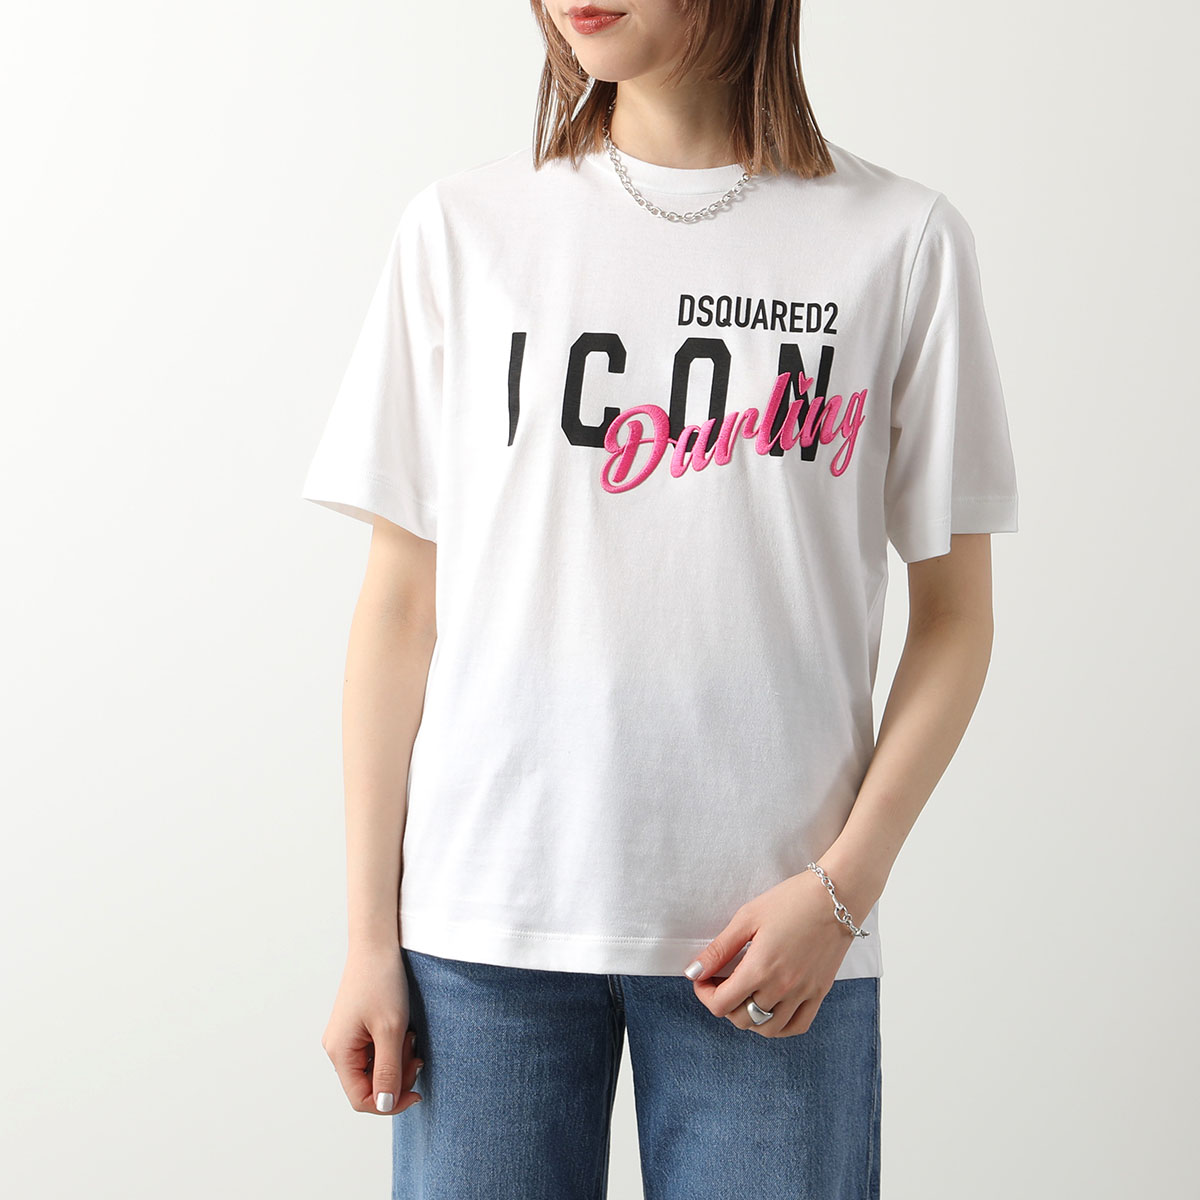 DSQUARED2 Tシャツ ICON DARLING EASY FIT T-SHIRT S80GC...